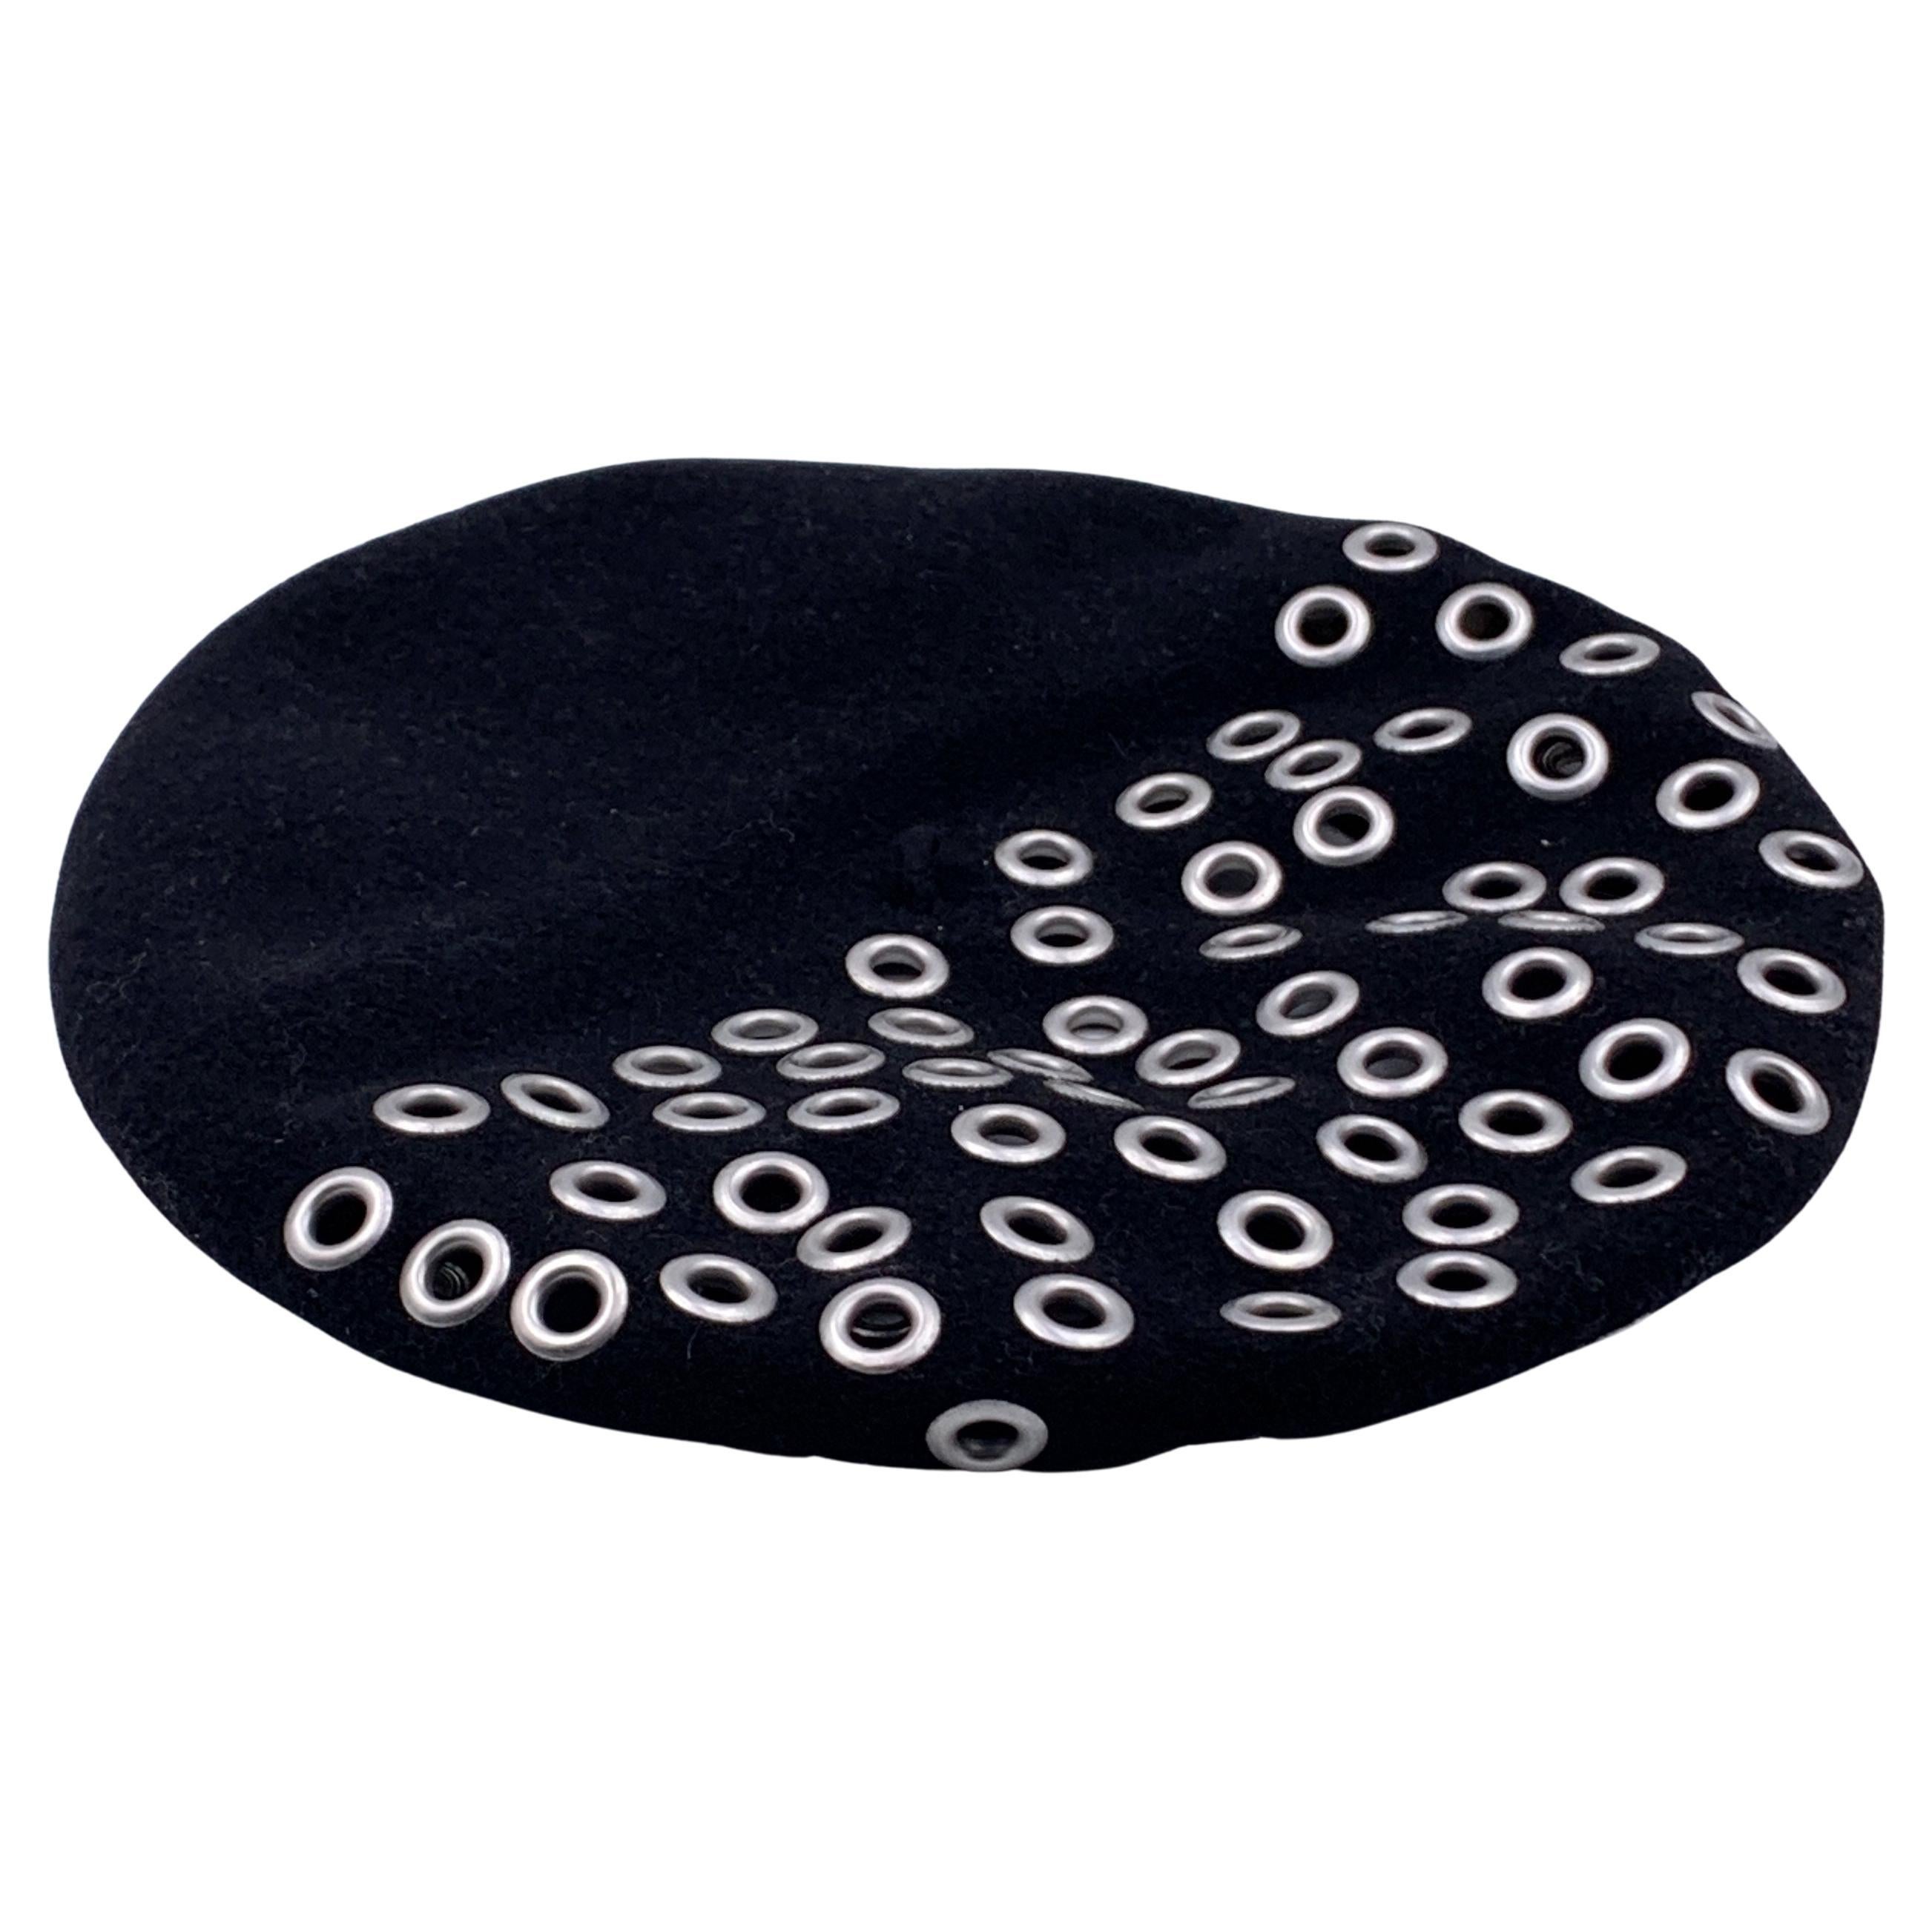 Christian Dior Black Wool Grommets Eyelets French Beret Hat